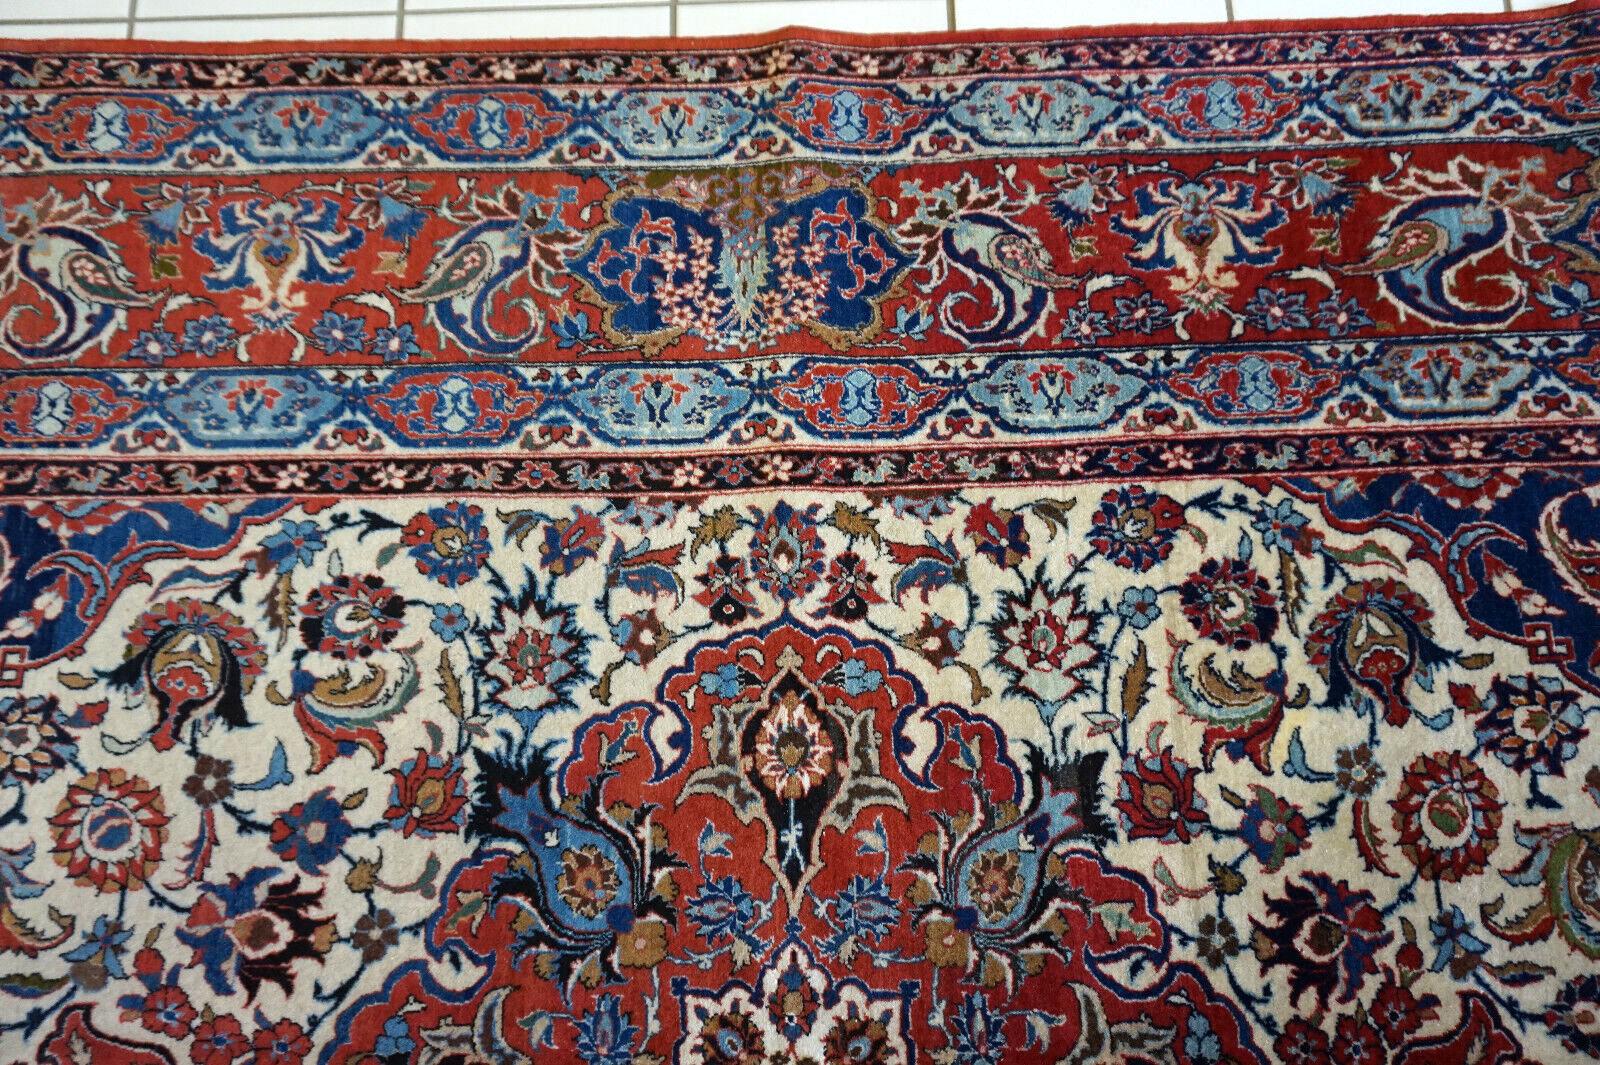 Handmade Antique Persian Style Isfahan Rug 4.5' x 7.7', 1920s - 1D53 For Sale 3